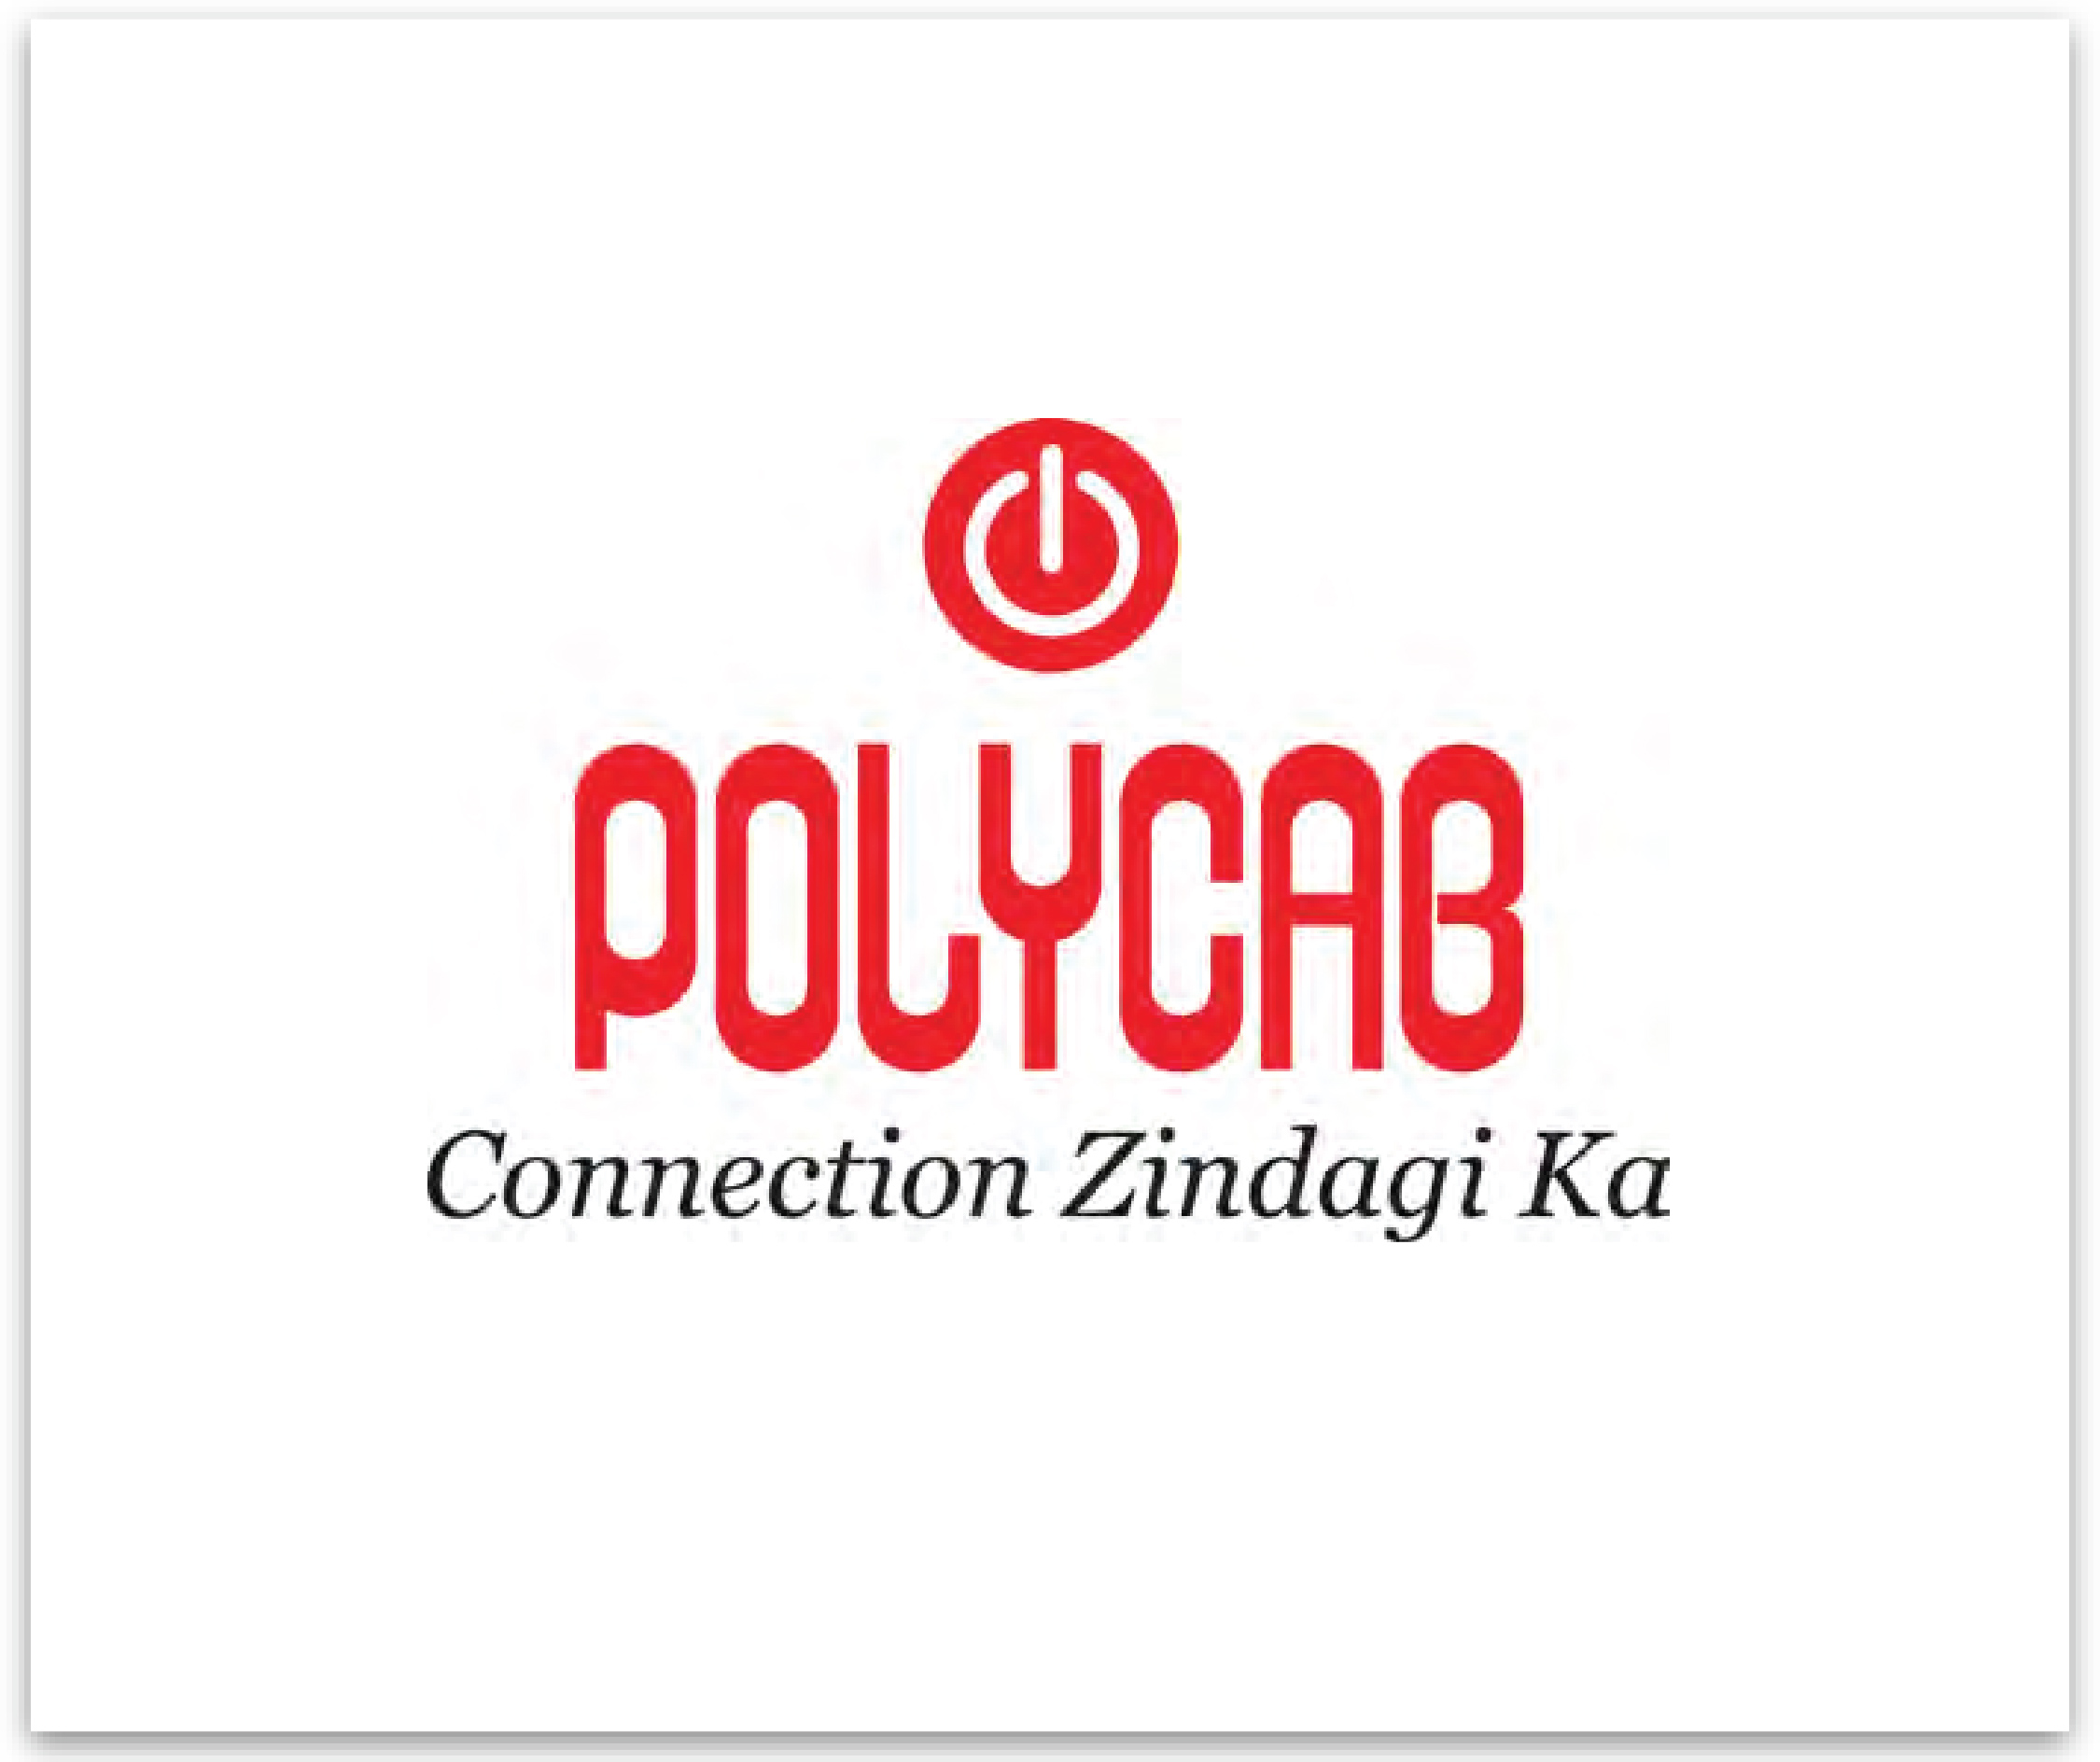 Polycab - Electrical Wire / Home Improvement Electrical Construction partner with Sowparnika Jazzmyna